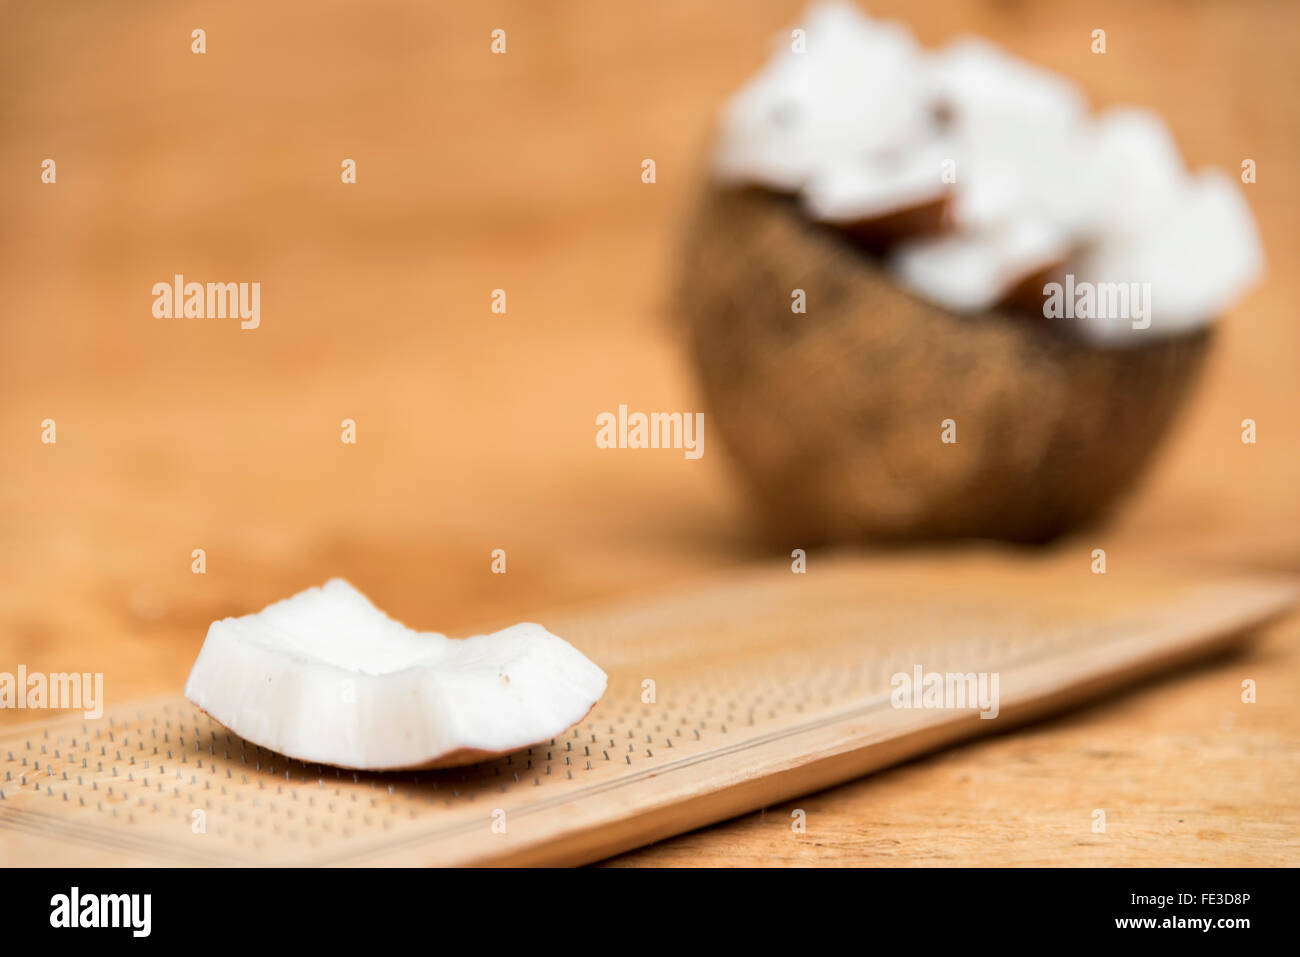 Old coconut cut on wooden background in two parts with negative space Stock Photo